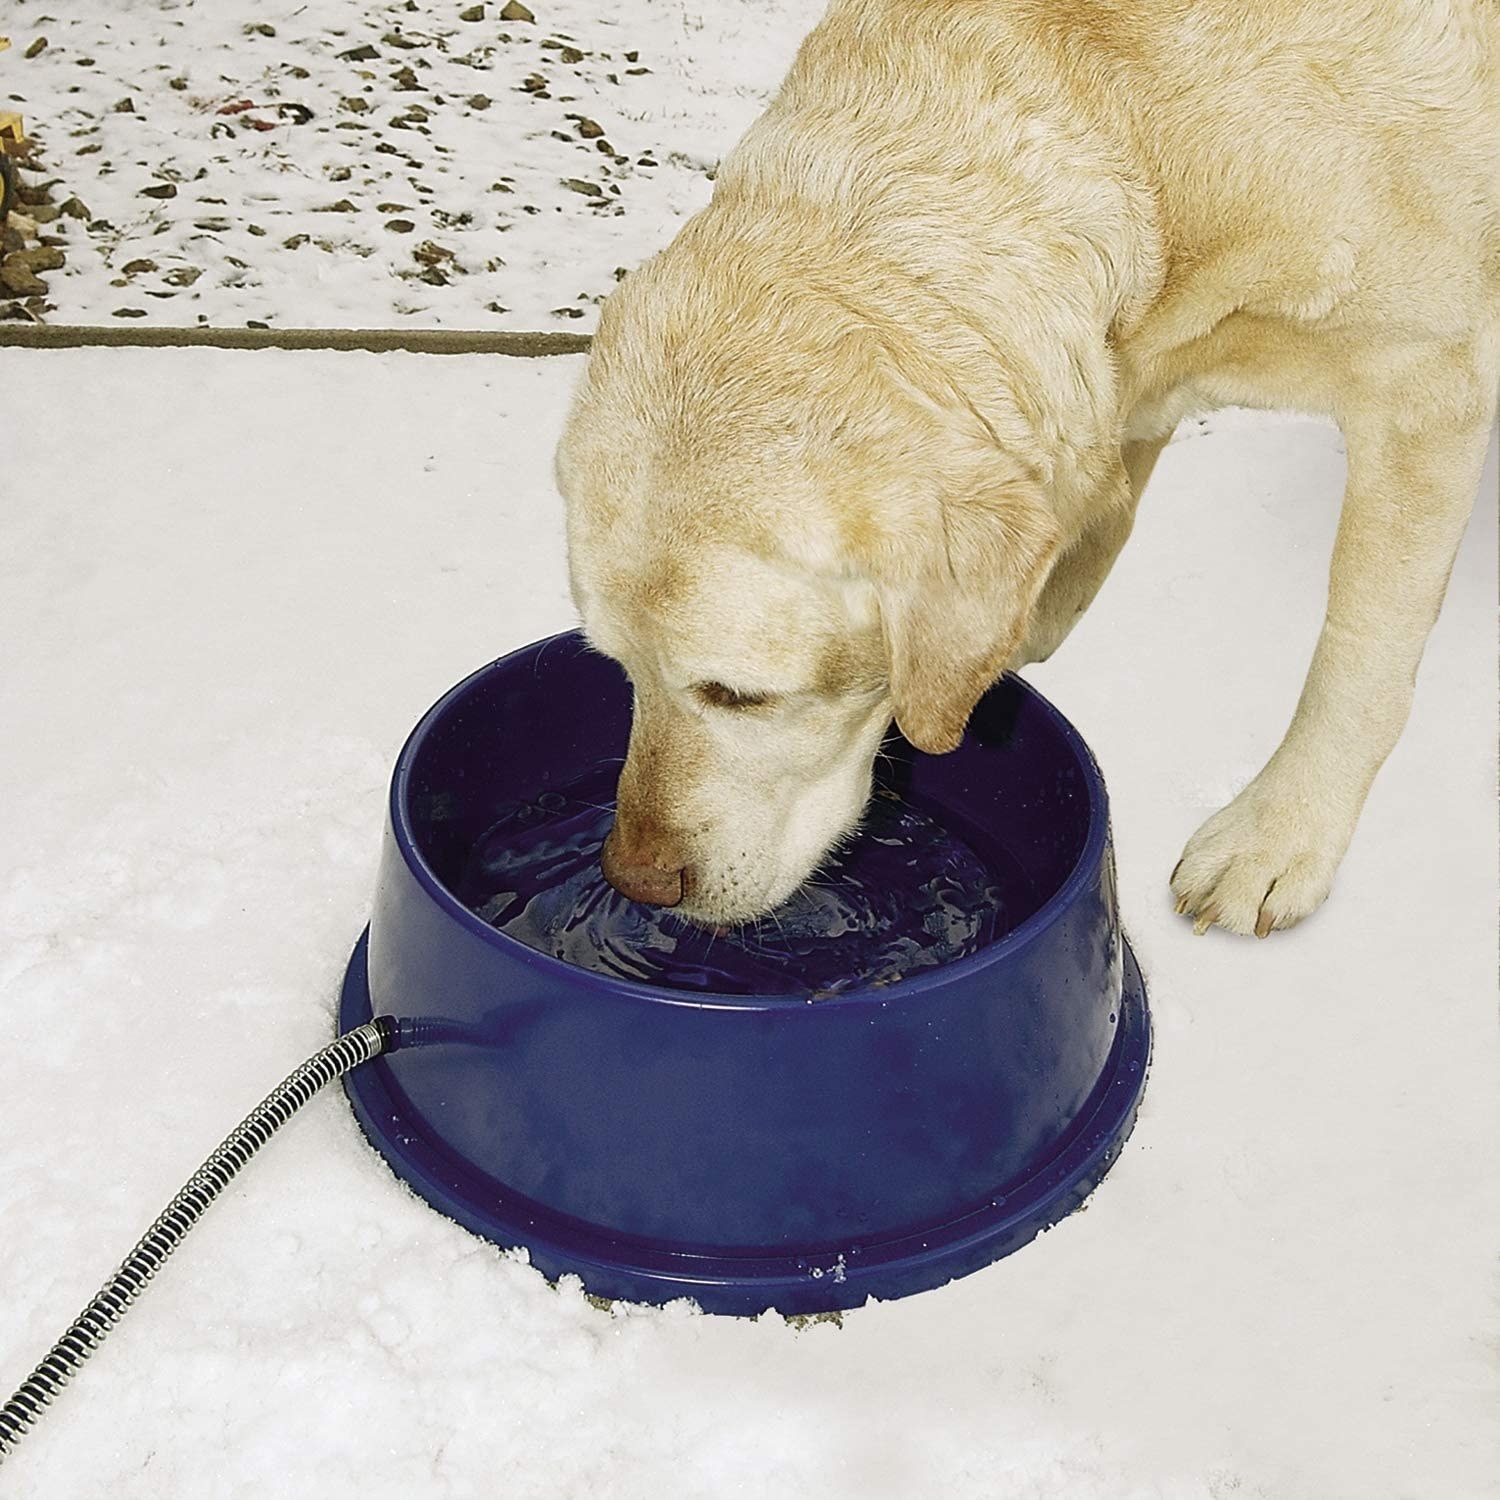 A dog drinking from the bowl in the snow